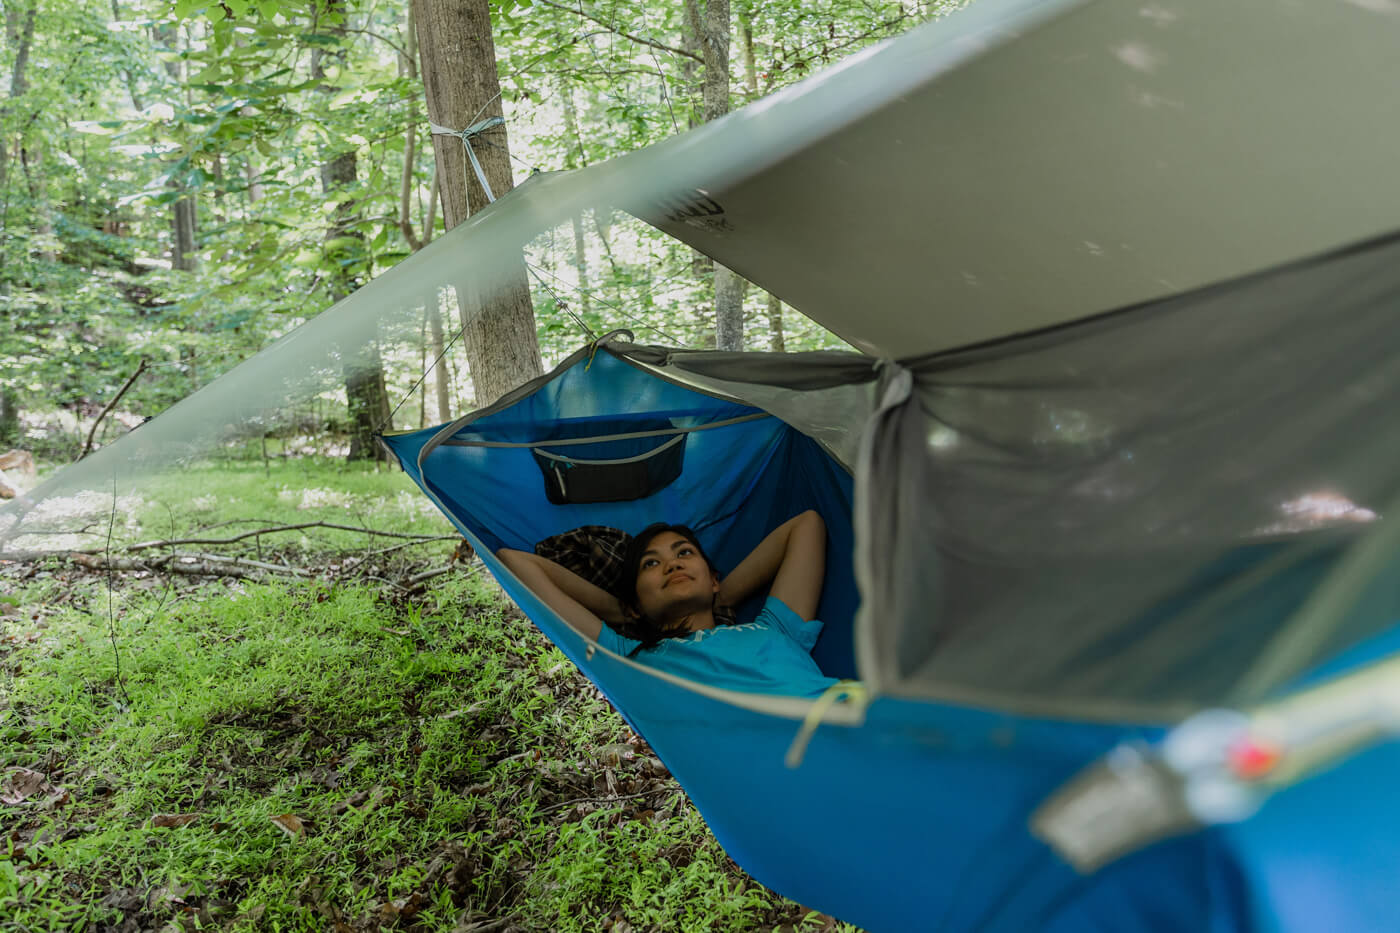 A woman lays in an ENO SkyLite Hammock with a rain fly in the middle of a forest